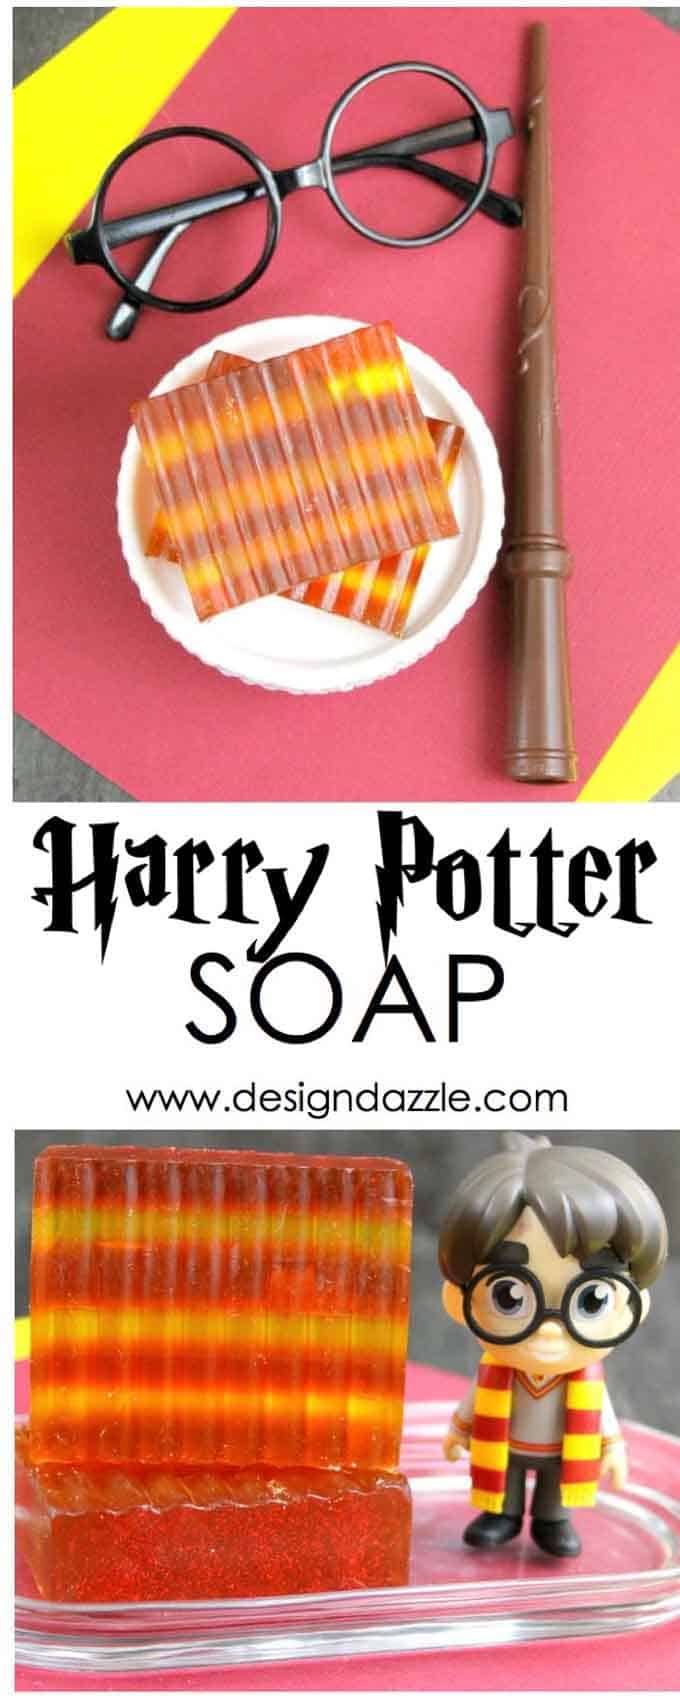 This Harry Potter soap will definitely get you so thrilled!It's super easy to make and a great gift idea for your family and friends that are certified Potterheads!It is also a nice favor for your Harry Potter themed party! - Design Dazzle